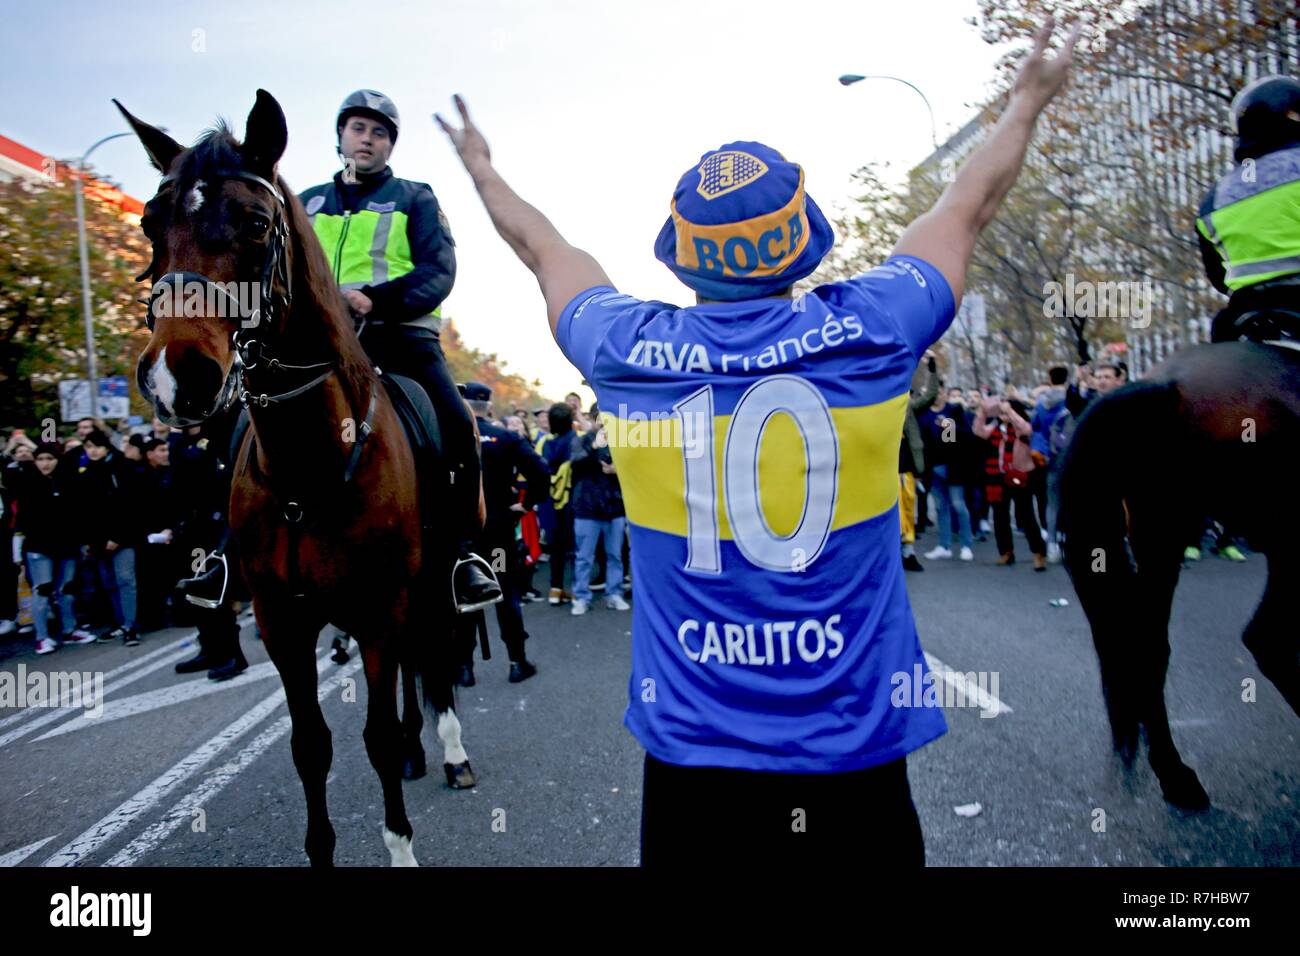 Madrid, Madrid, Spain. 9th Dec, 2018. A Boca Juniors fan seen before the match outside the stadium.The Copa Libertadores Final match between River Plate and Boca Juniors is being played in Madrid. Credit: Mario Roldan/SOPA Images/ZUMA Wire/Alamy Live News Stock Photo